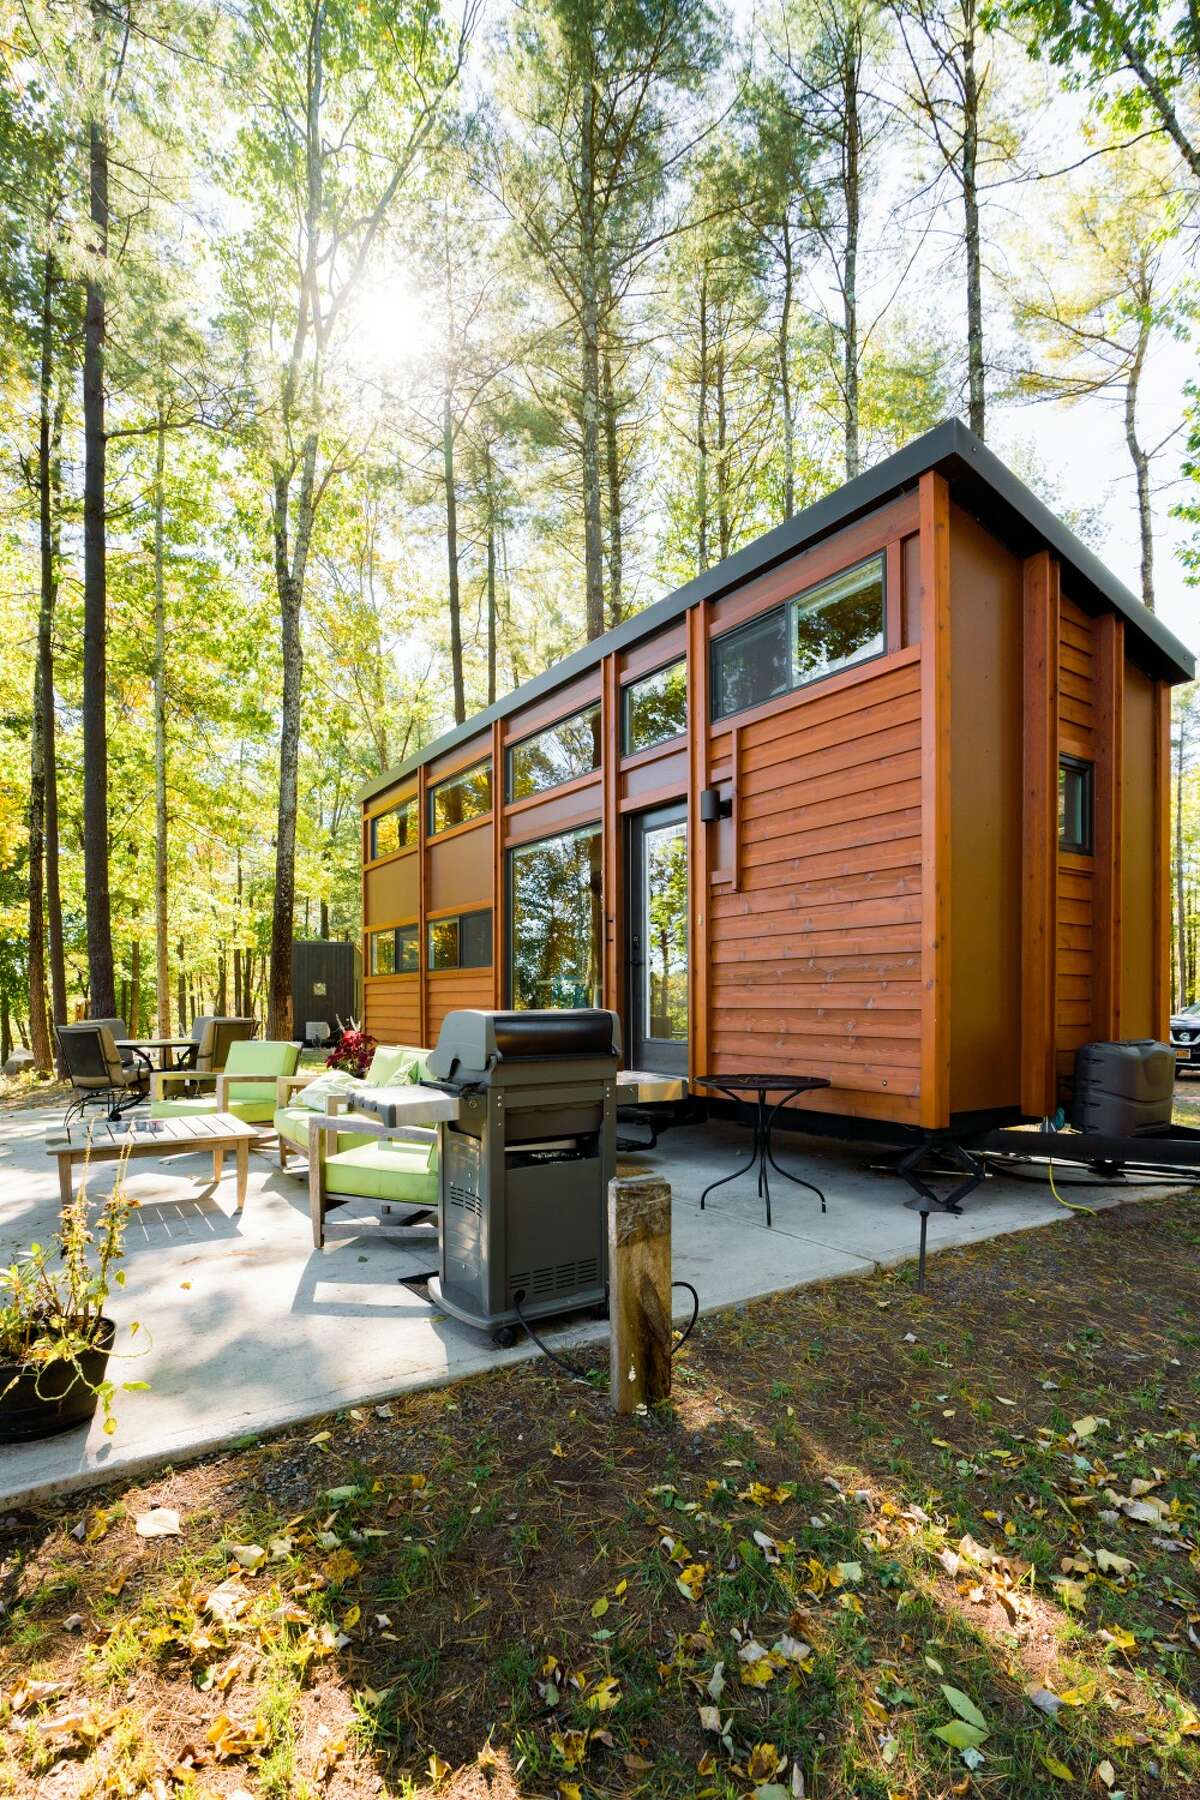 South Cairo, the Catskills. Five guests, one bedroom, one bed, one bath. "Tiny house perched over Catskill Creek. ... The compact interior offers a neatly arrayed, wood-paneled layout featuring soaring ceilings on the main floor, and an extra sleeping loft." $225 per night. See website.